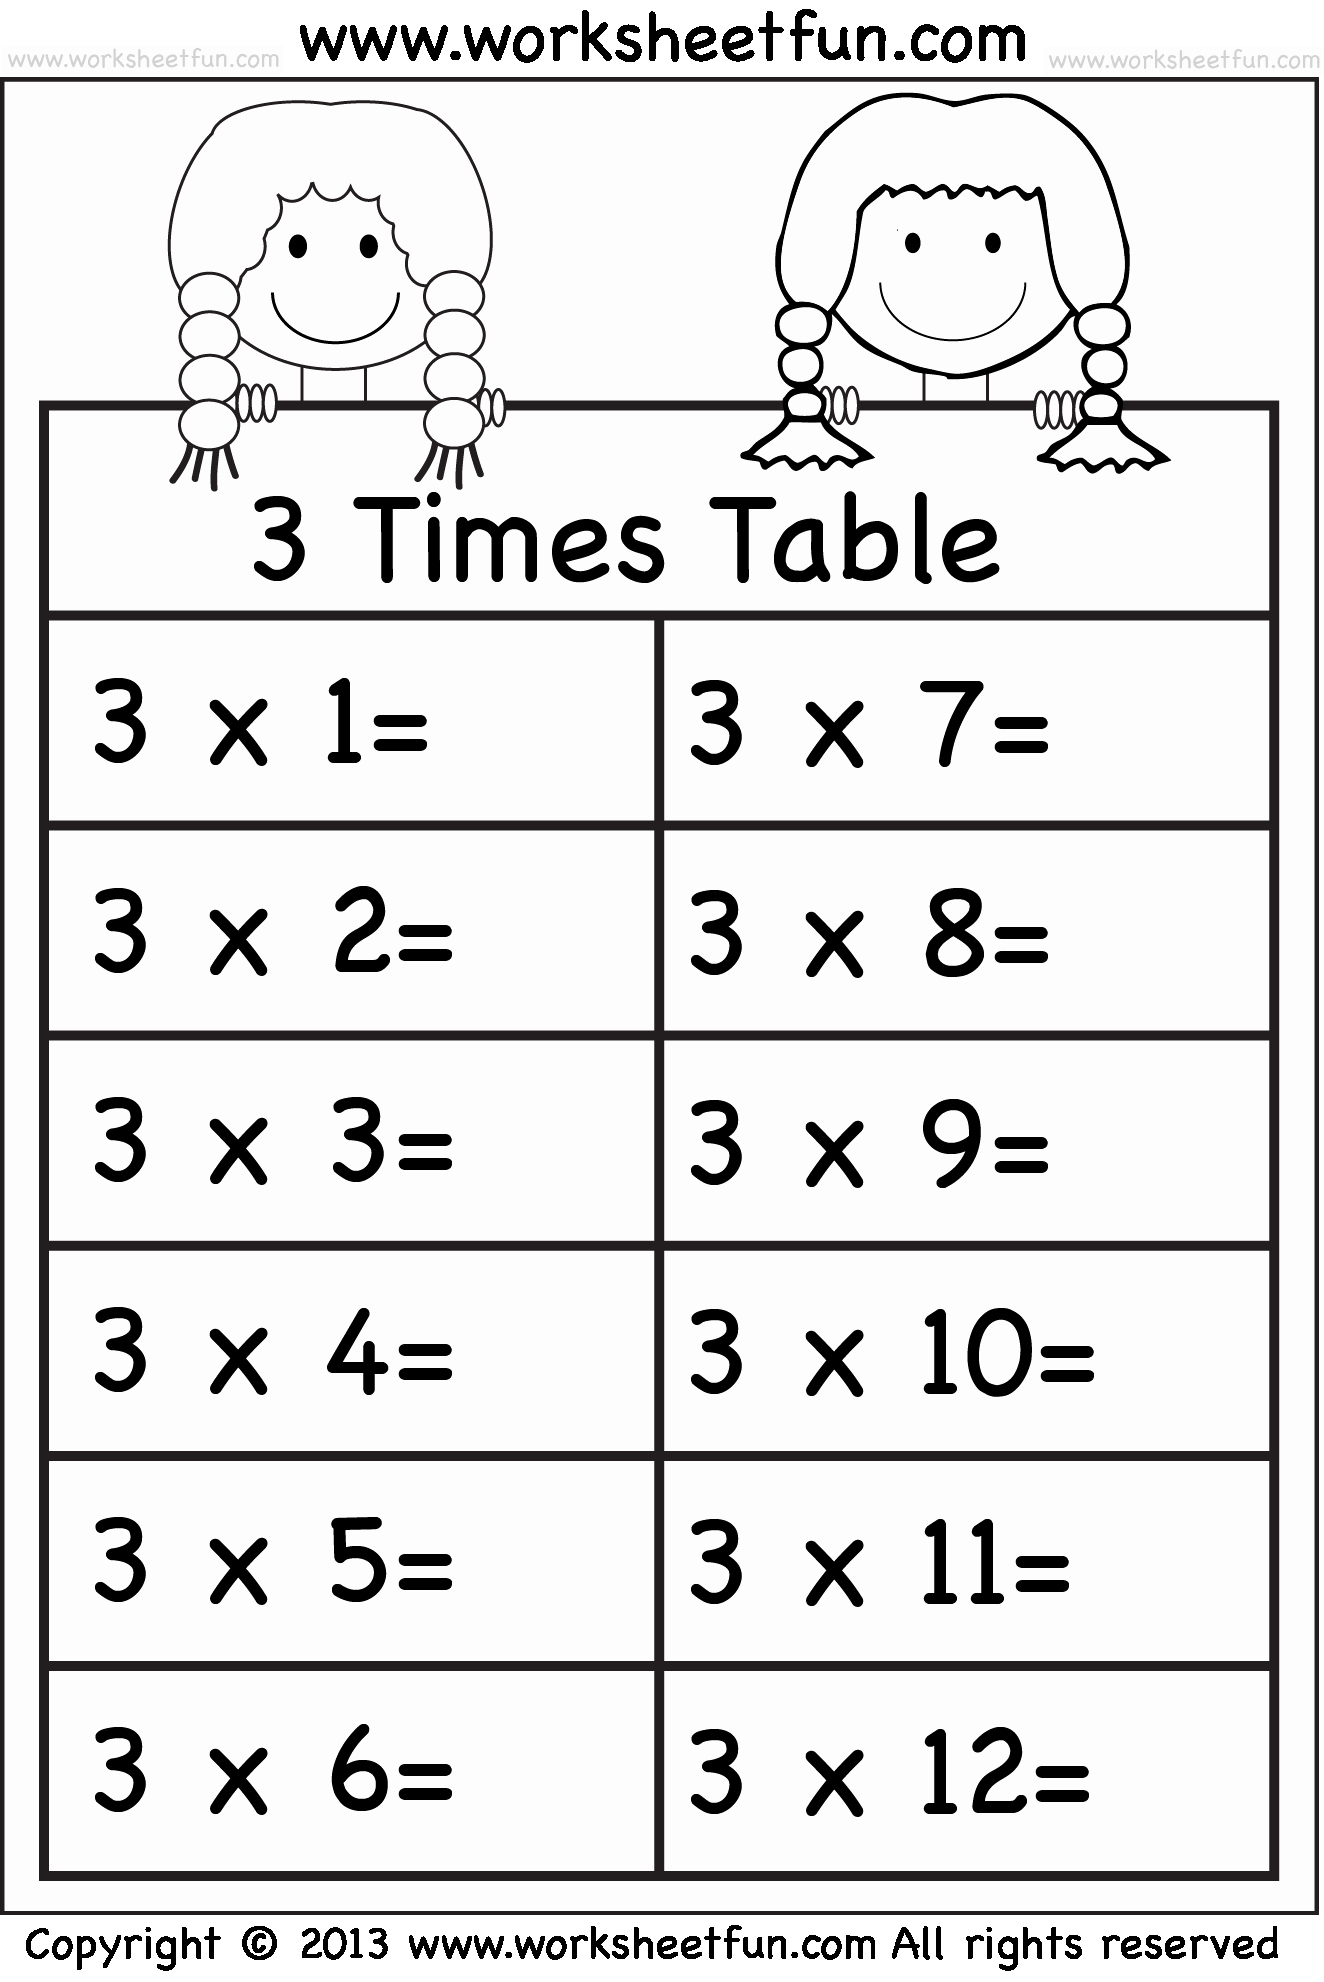 3 Times Table Worksheet New Times Tables Worksheets – 2 3 4 5 6 7 8 9 10 11